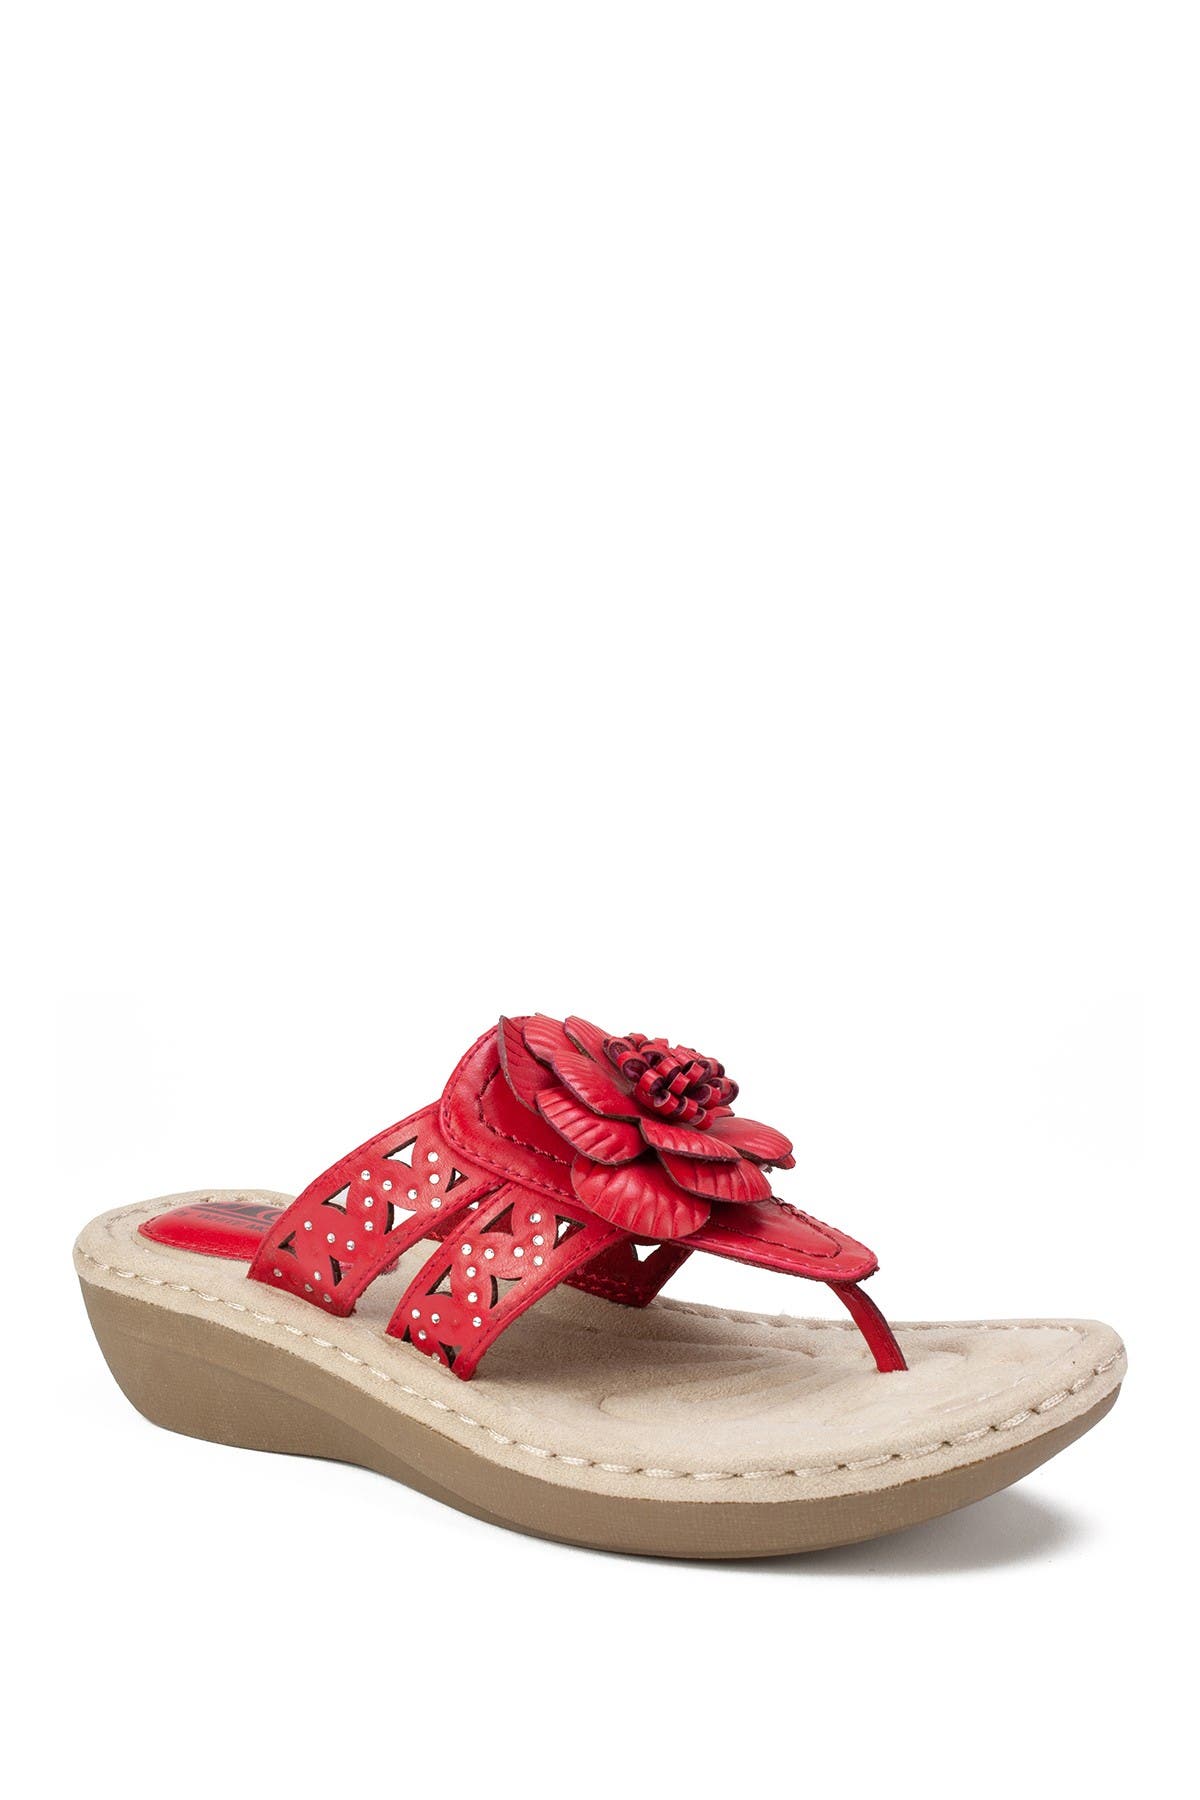 Cliffs By White Mountain Cynthia Thong Comfort Sandal In Berry Red/smooth